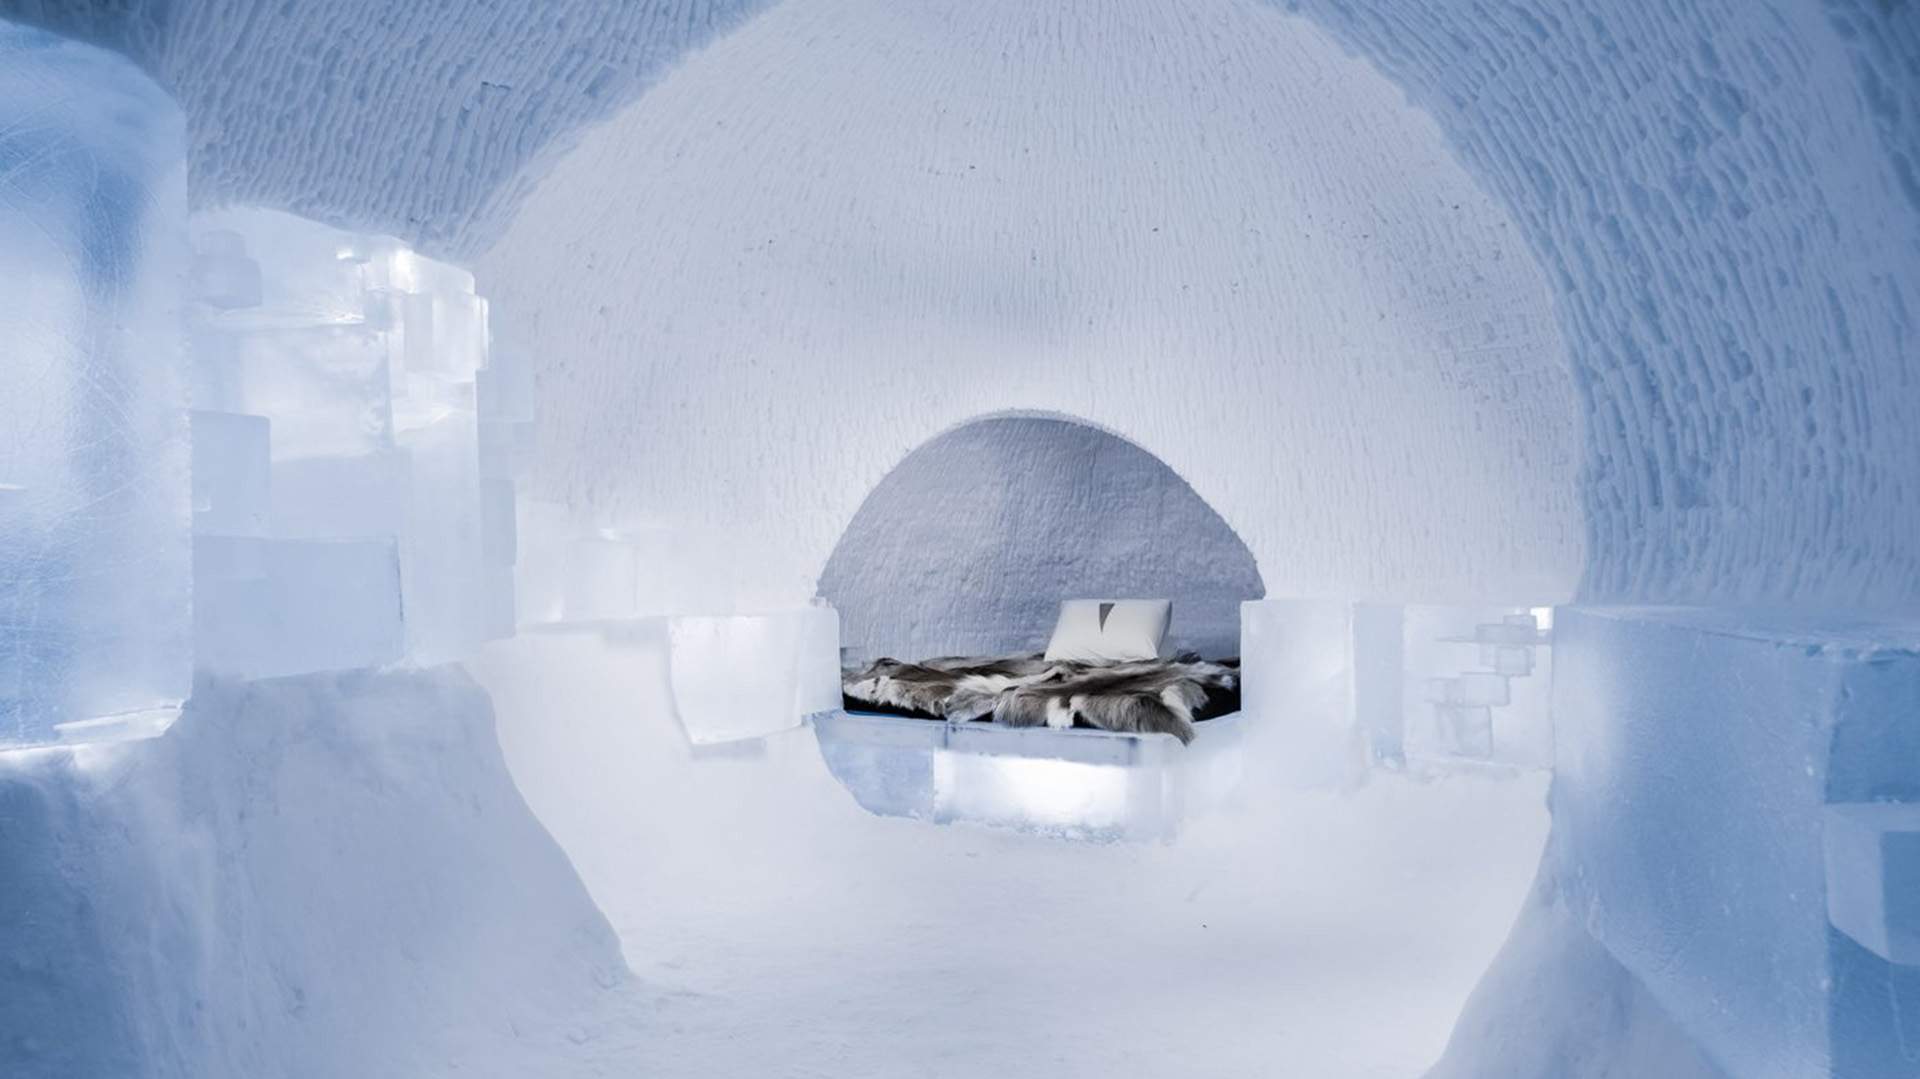 Sweden's Ice Hotel Has Unveiled Its Frosty New Artist-Created Rooms